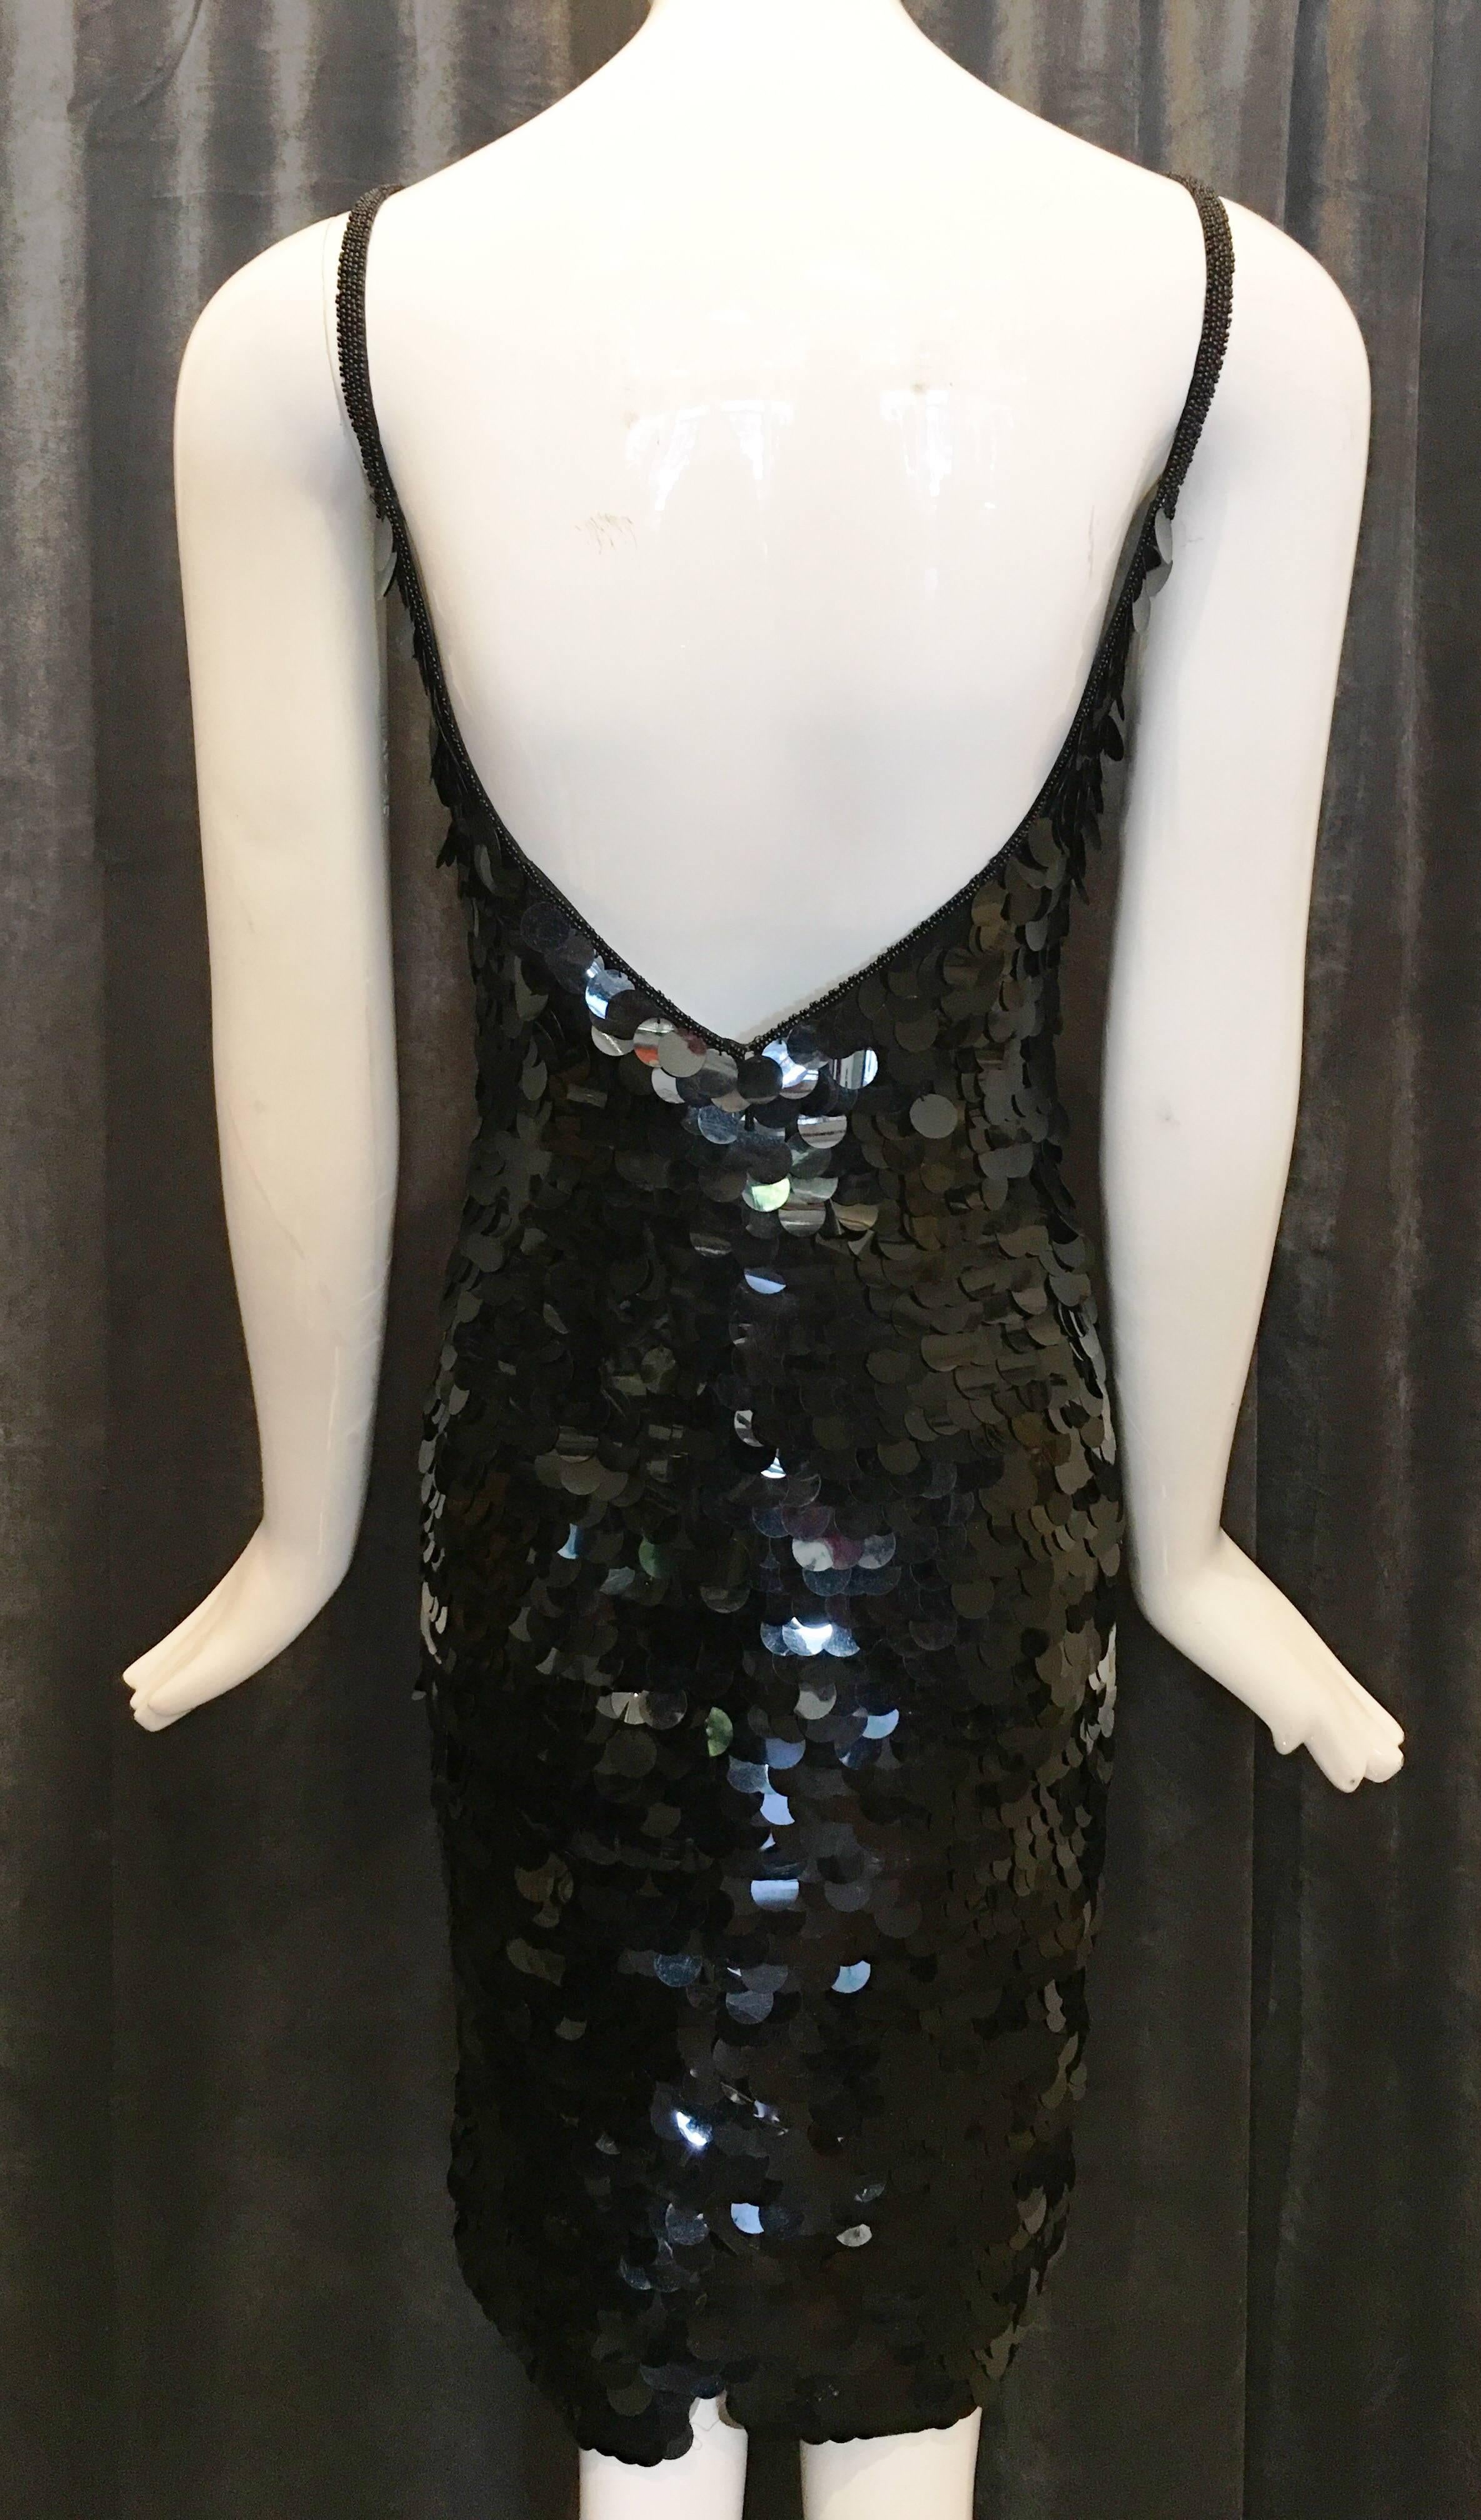 1980s Oleg Cassini Black Fish Scale Sheath Dress In Excellent Condition For Sale In Brooklyn, NY